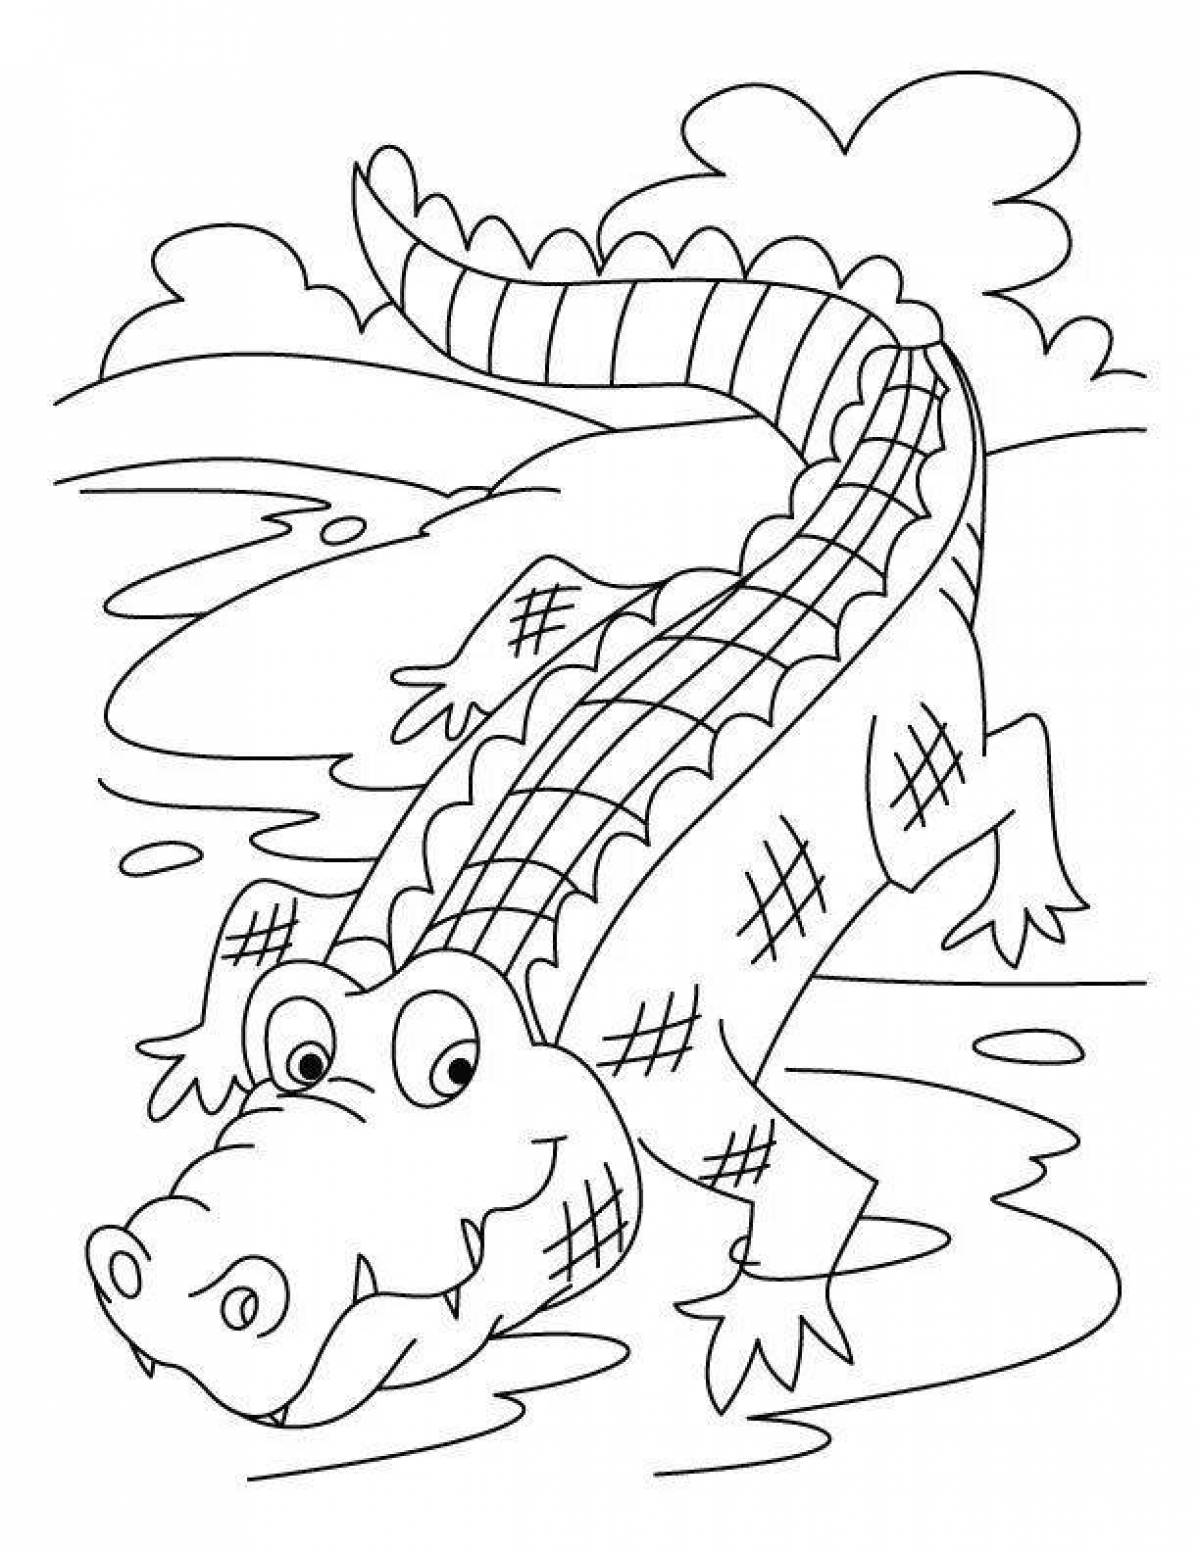 Playful alligator coloring page